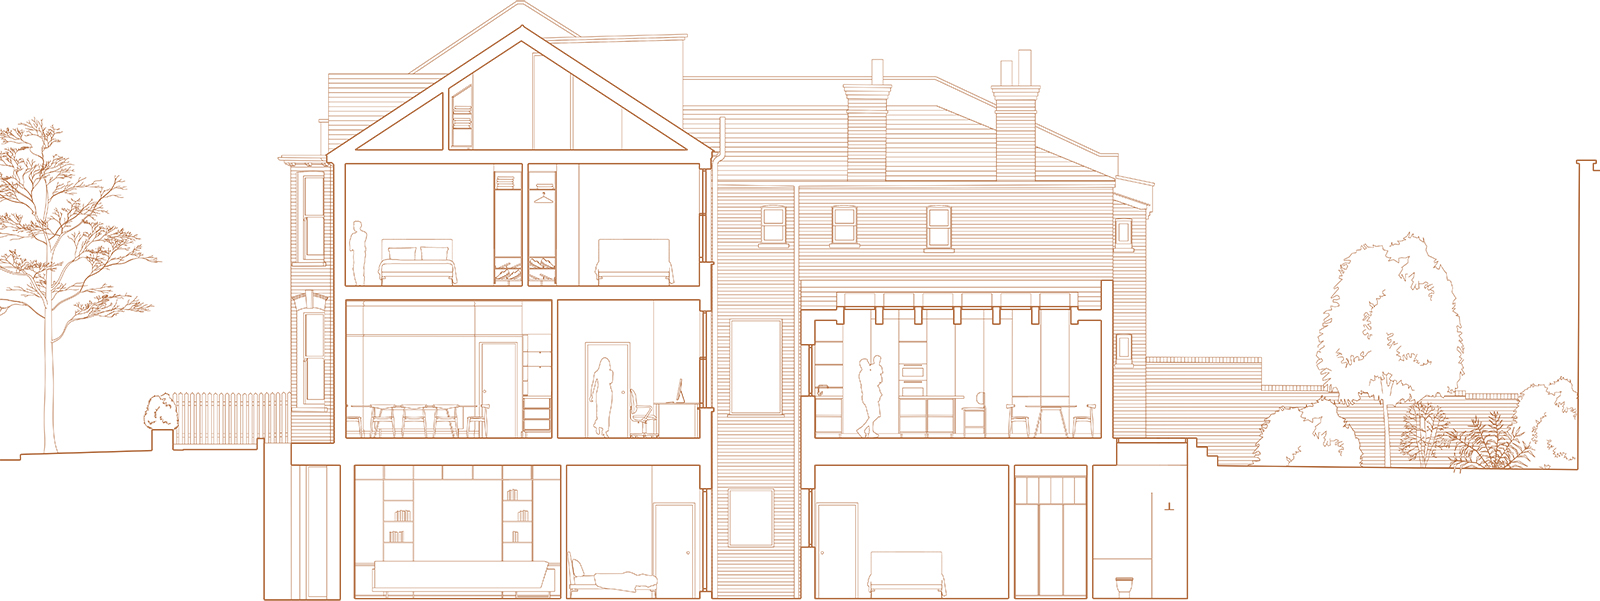 North London Terraced House: Section drawing